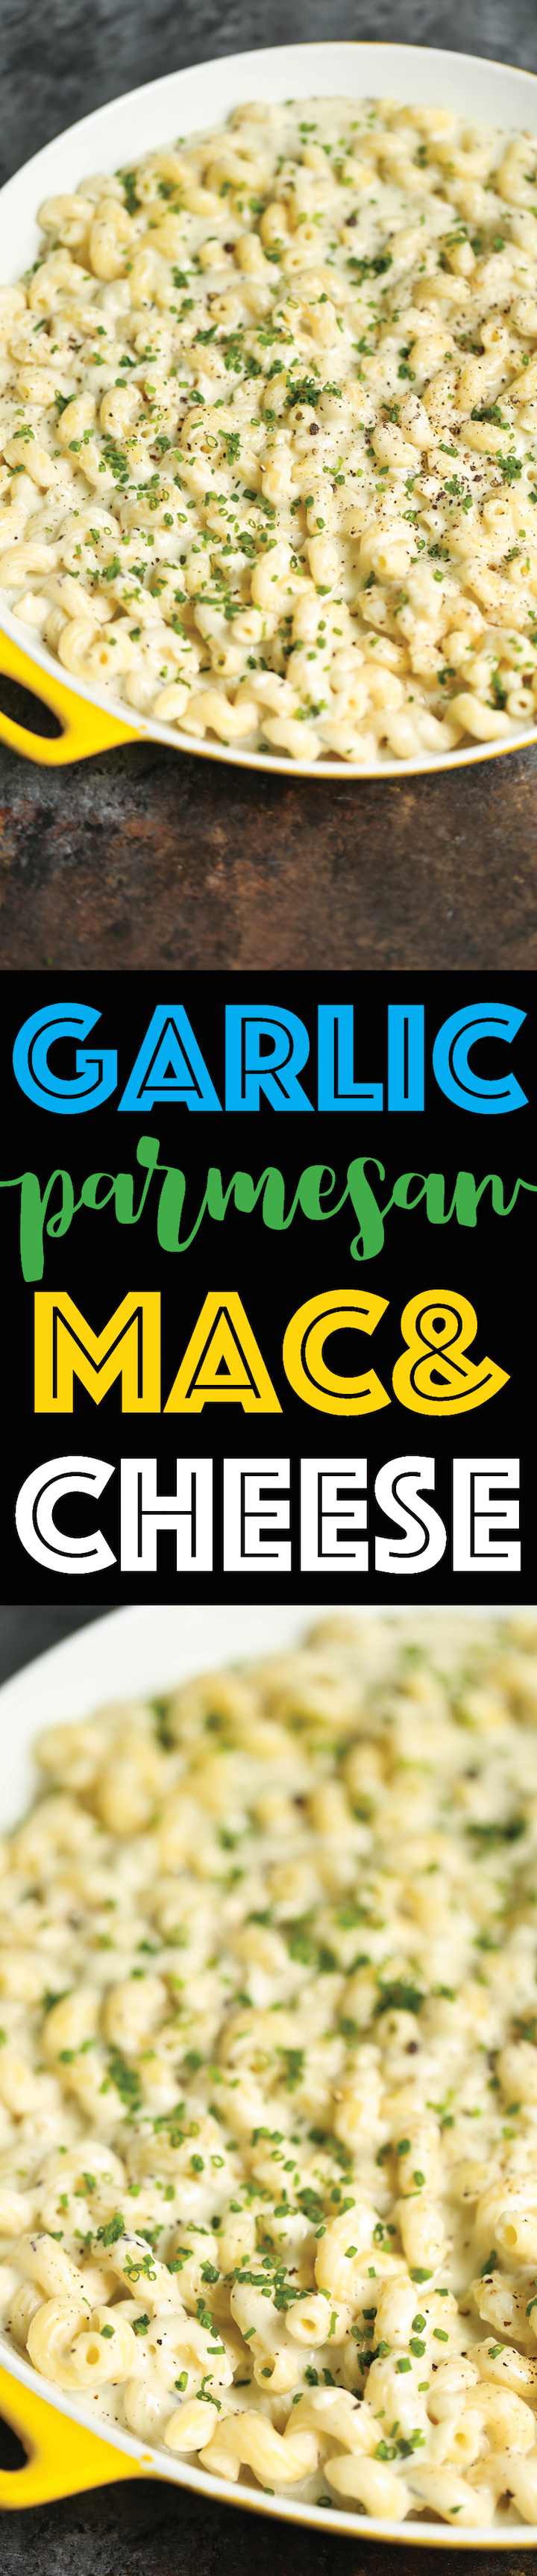 Garlic Parmesan Mac and Cheese - This will be the best mac and cheese you will ever have! With 3 different types of cheeses and the creamiest sauce EVER!!!